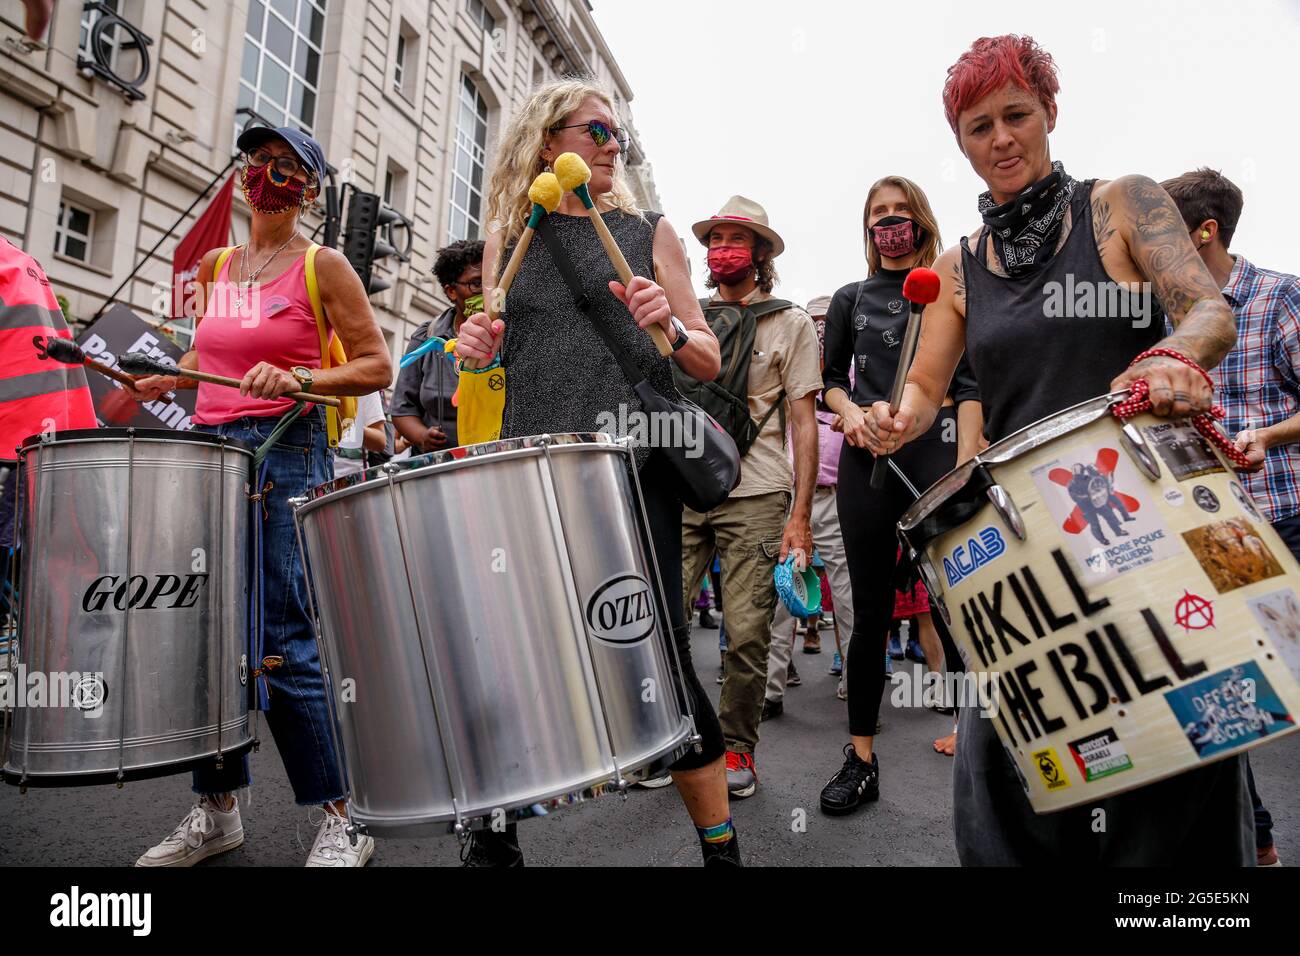 London,  UK on June 26, 2021: Anti-government activists  protest  Piccadilly Circus. The protest unites activists from many opposition left wing movements such as Kill the Bill, The People's Assembly, NHS Staff Voices, Stop the War Coalition or Extintion Rebellion. Stock Photo